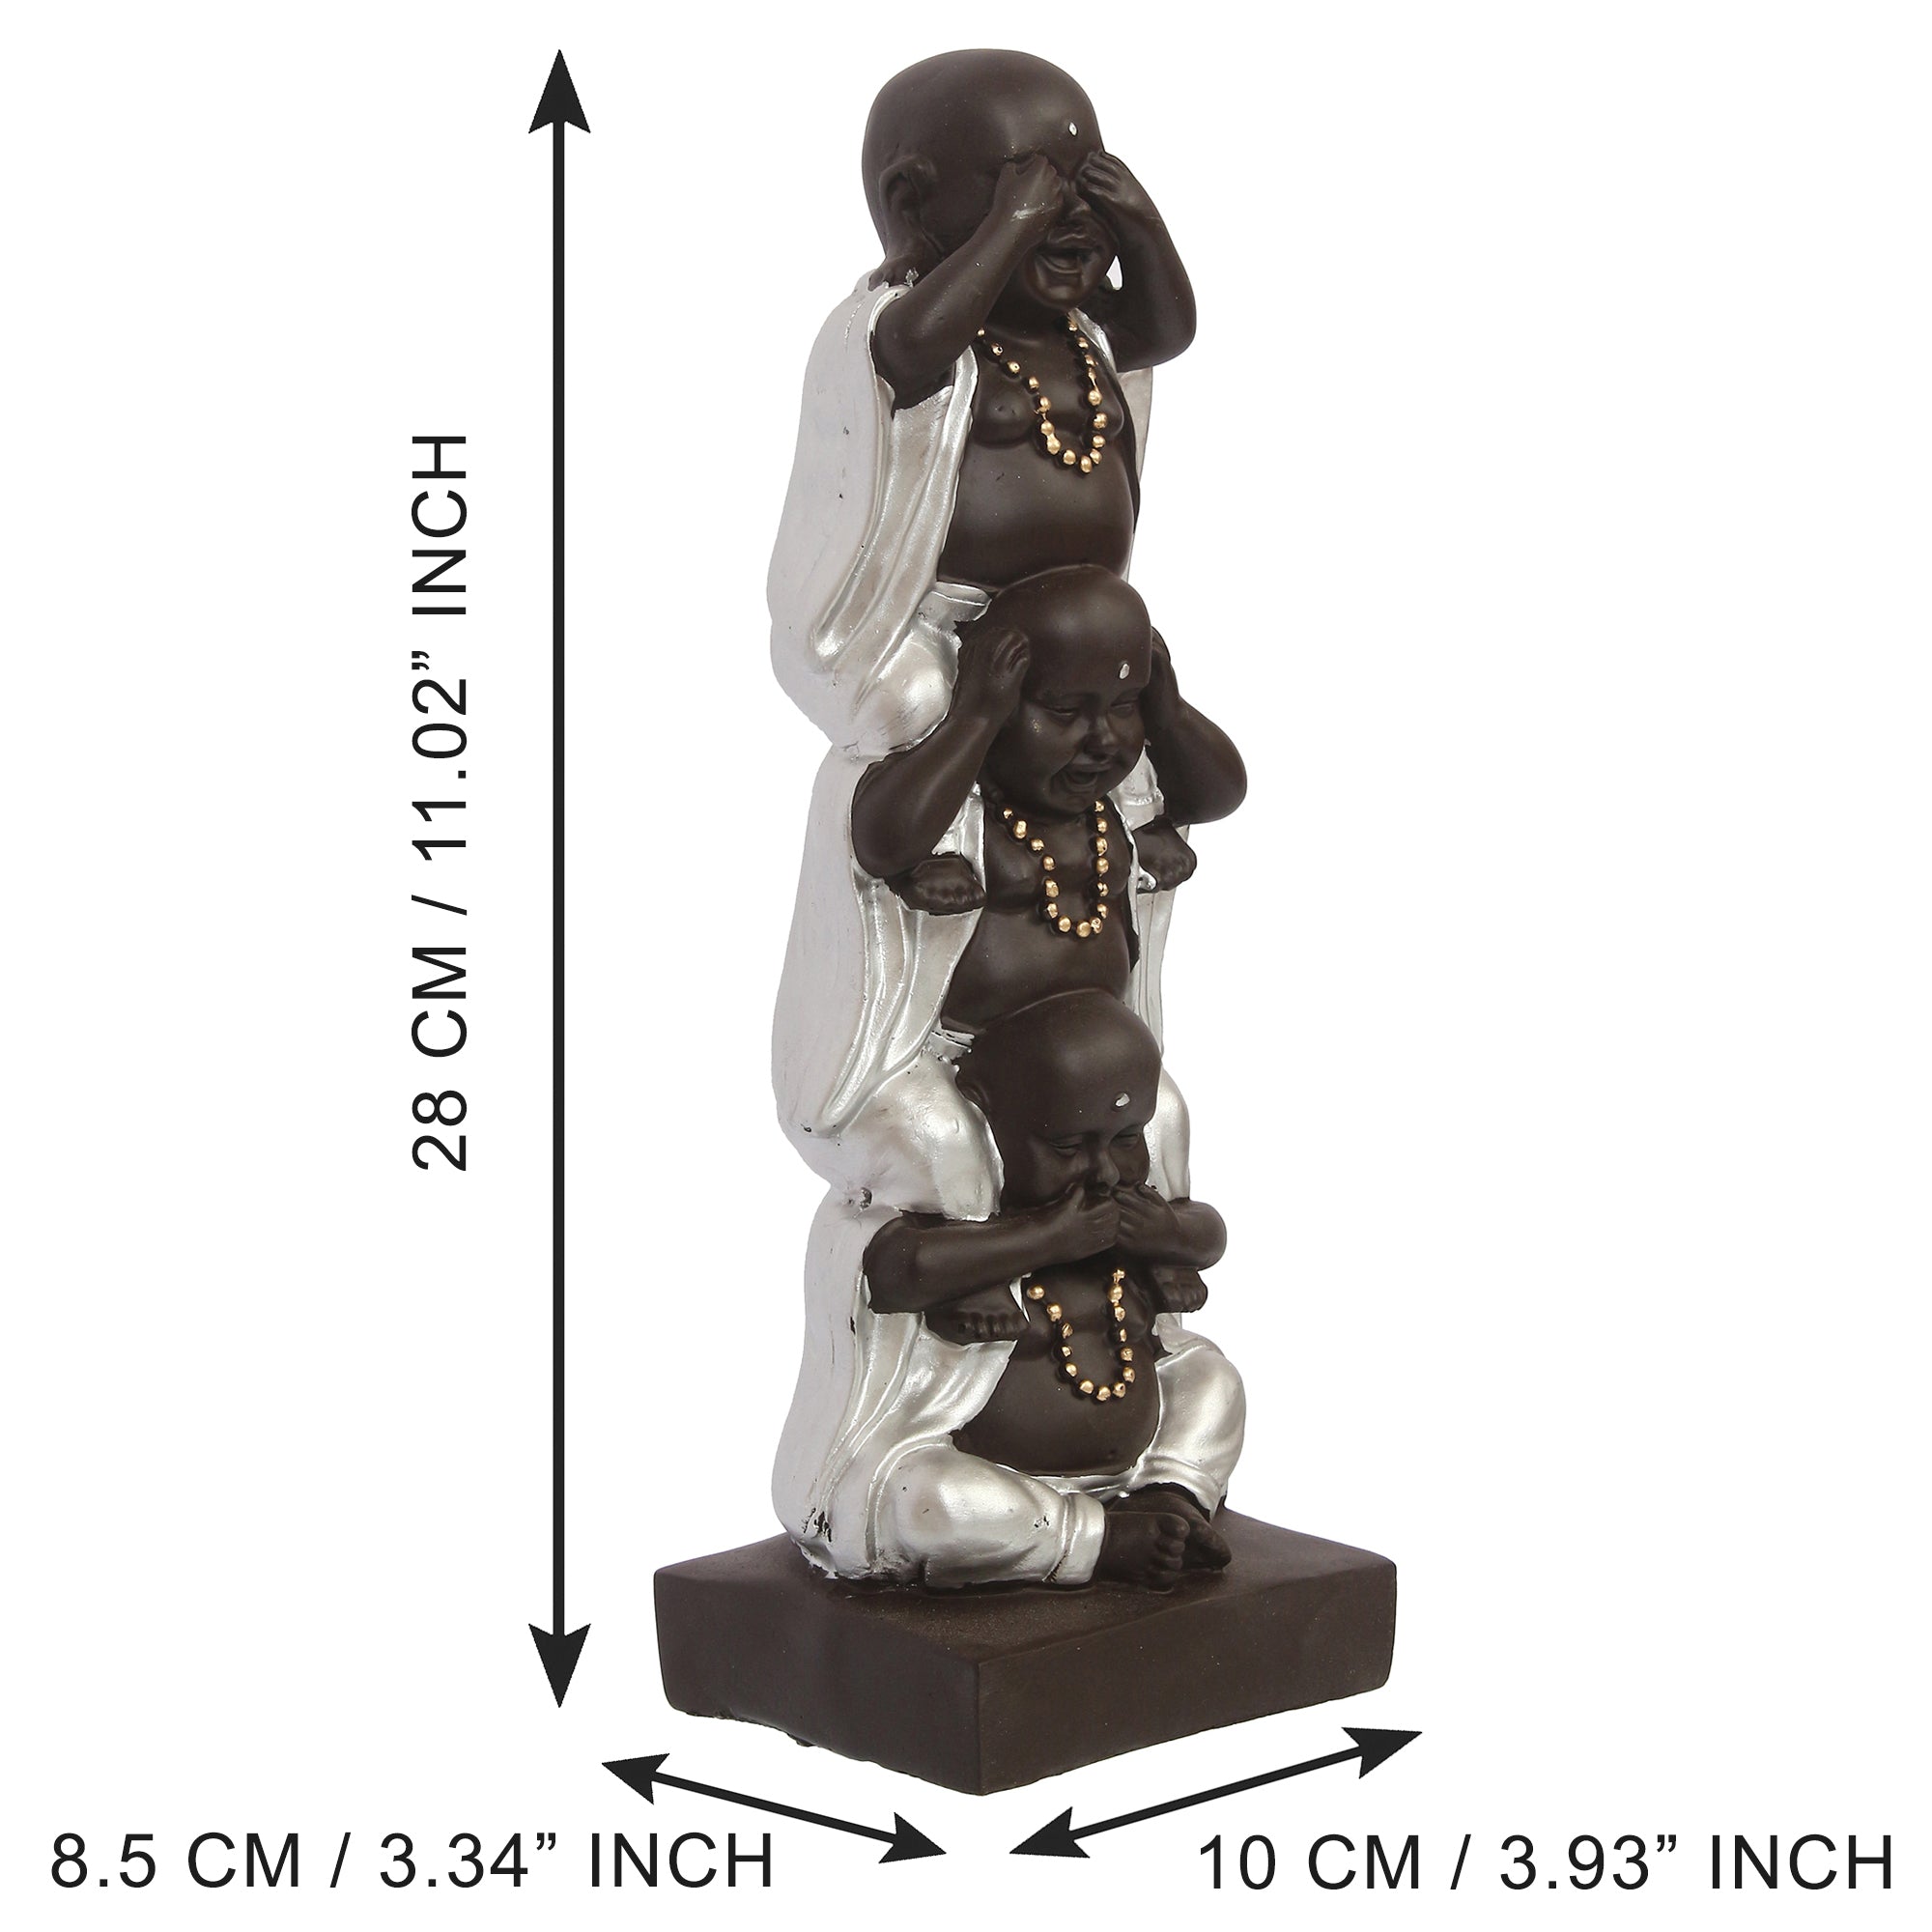 Polyresin Silver and Black Set of 3 Laughing Buddha Idol Standing on each other Decorative Showpiece 2